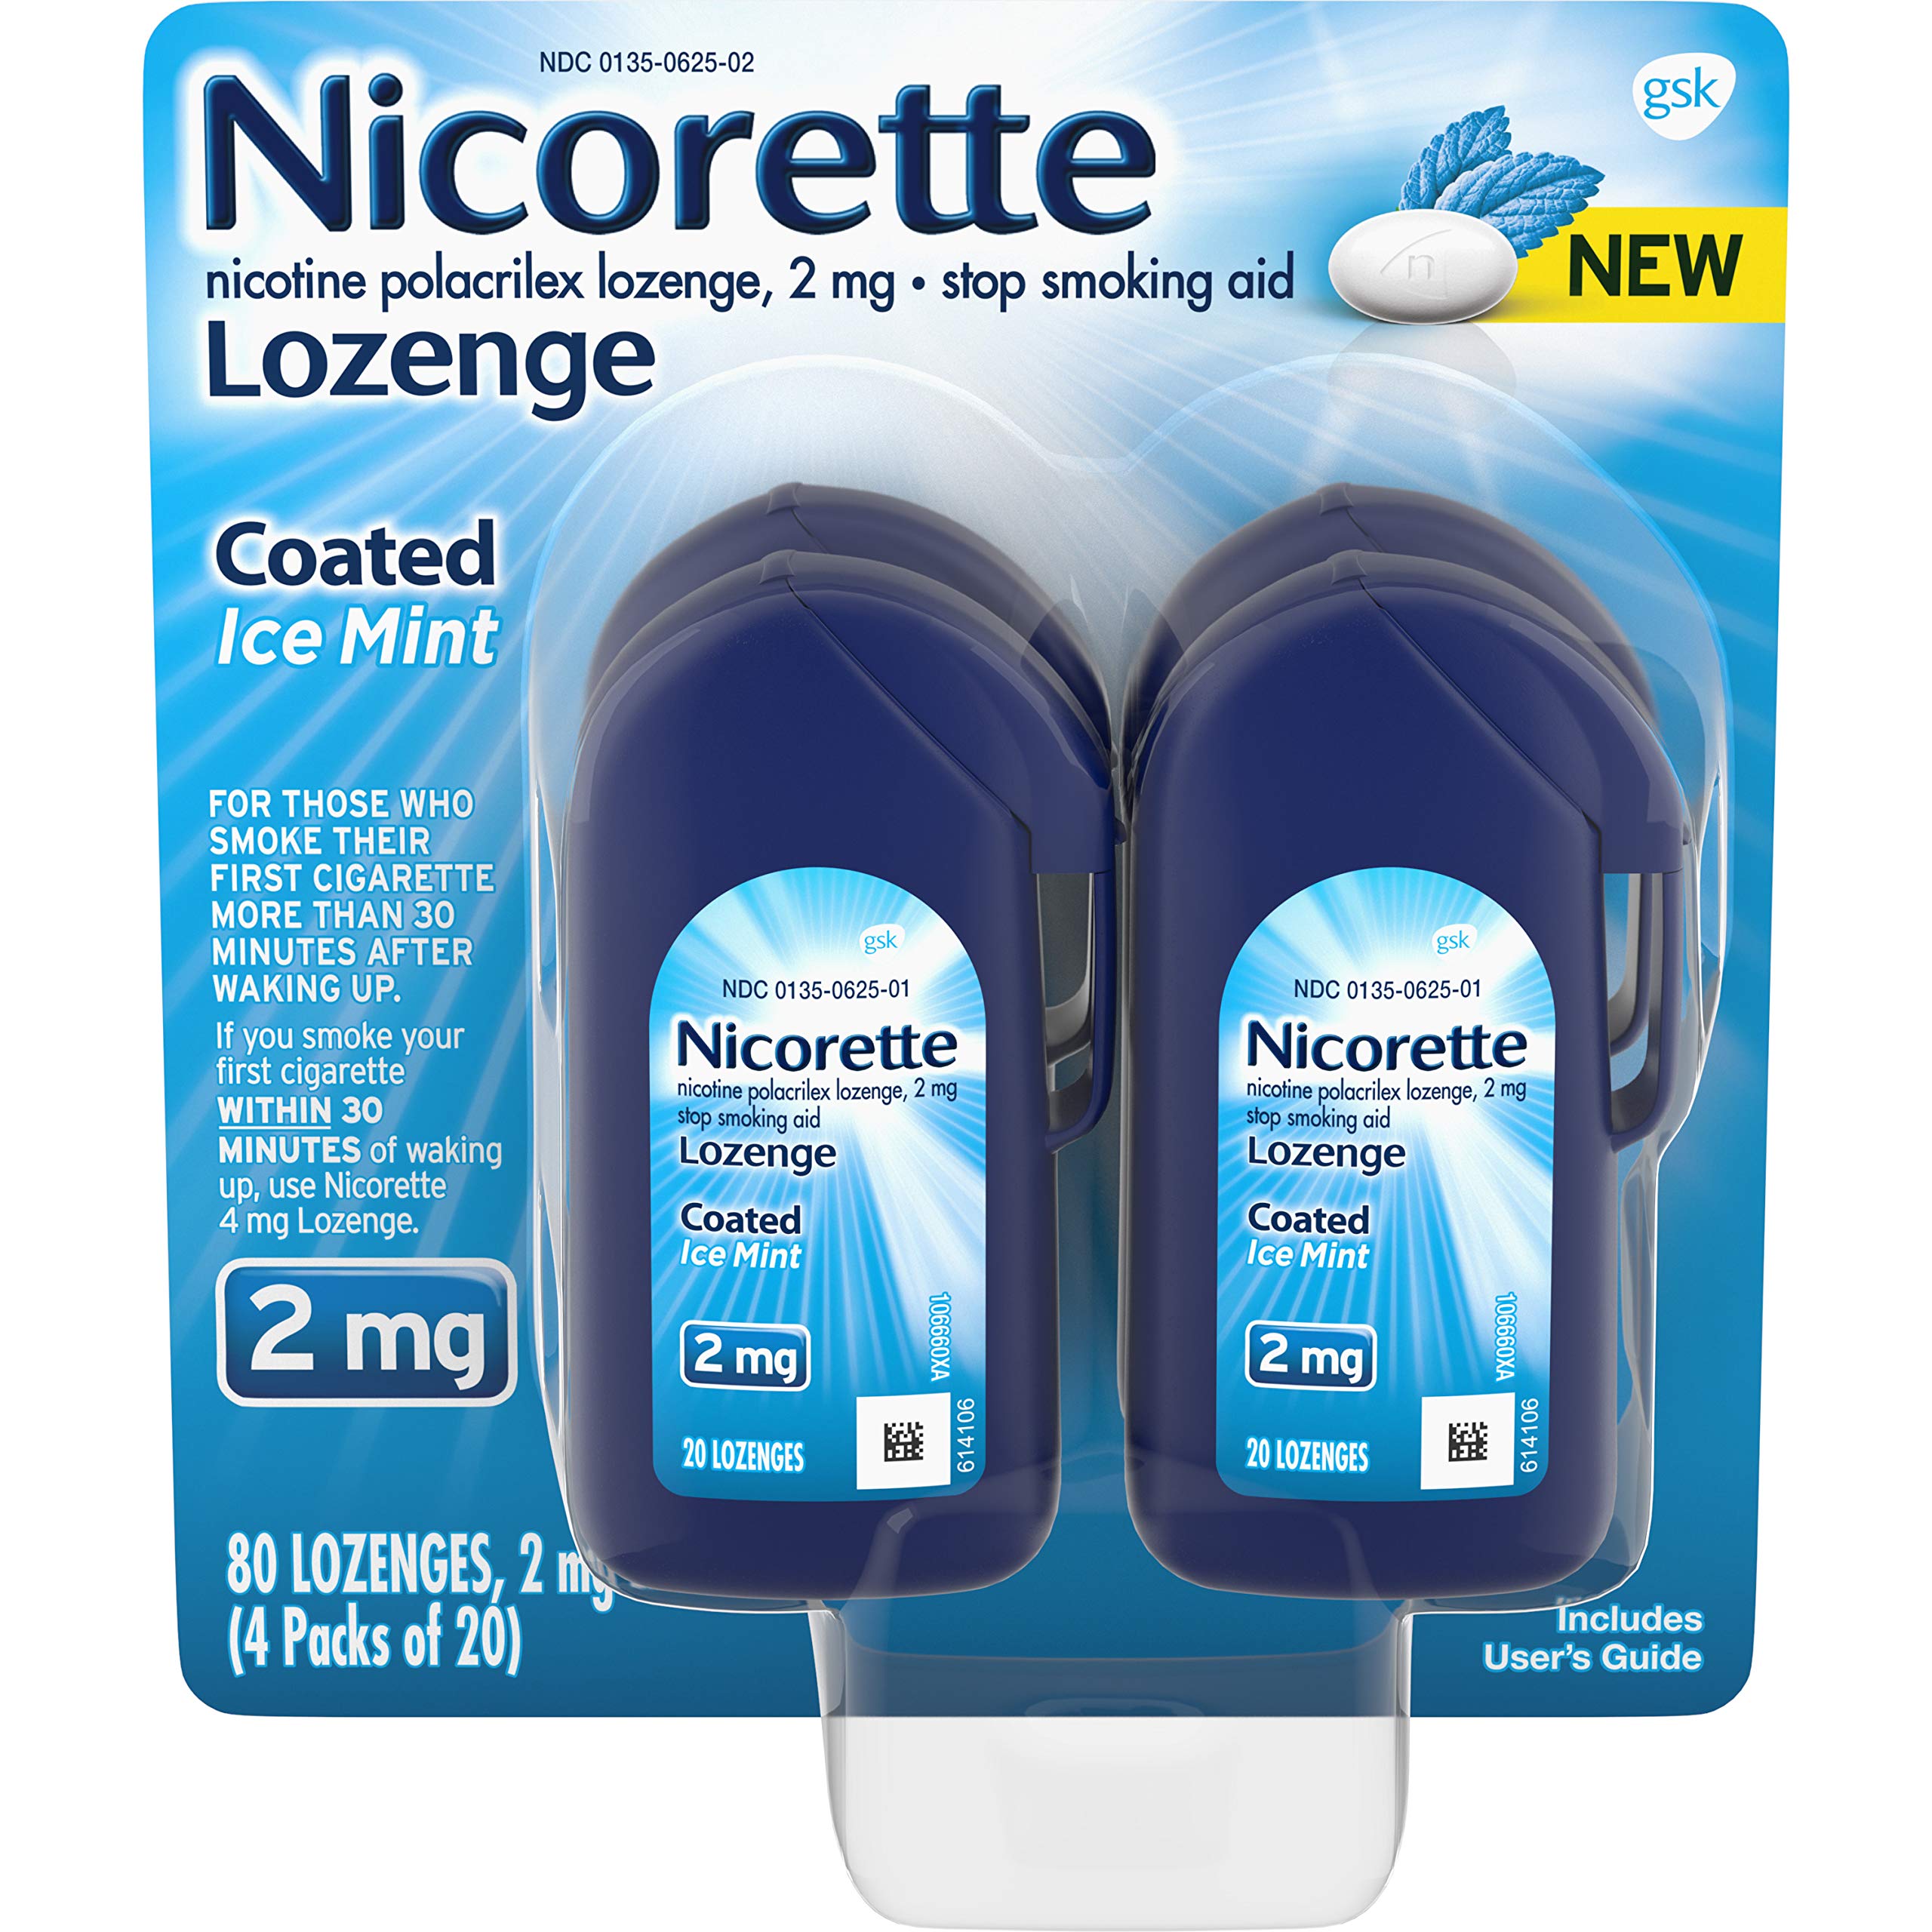 Nicorette 2 mg Coated Nicotine Lozenges to Help Stop Smoking - Ice Mint Flavored Stop Smoking Aid, 80 Count